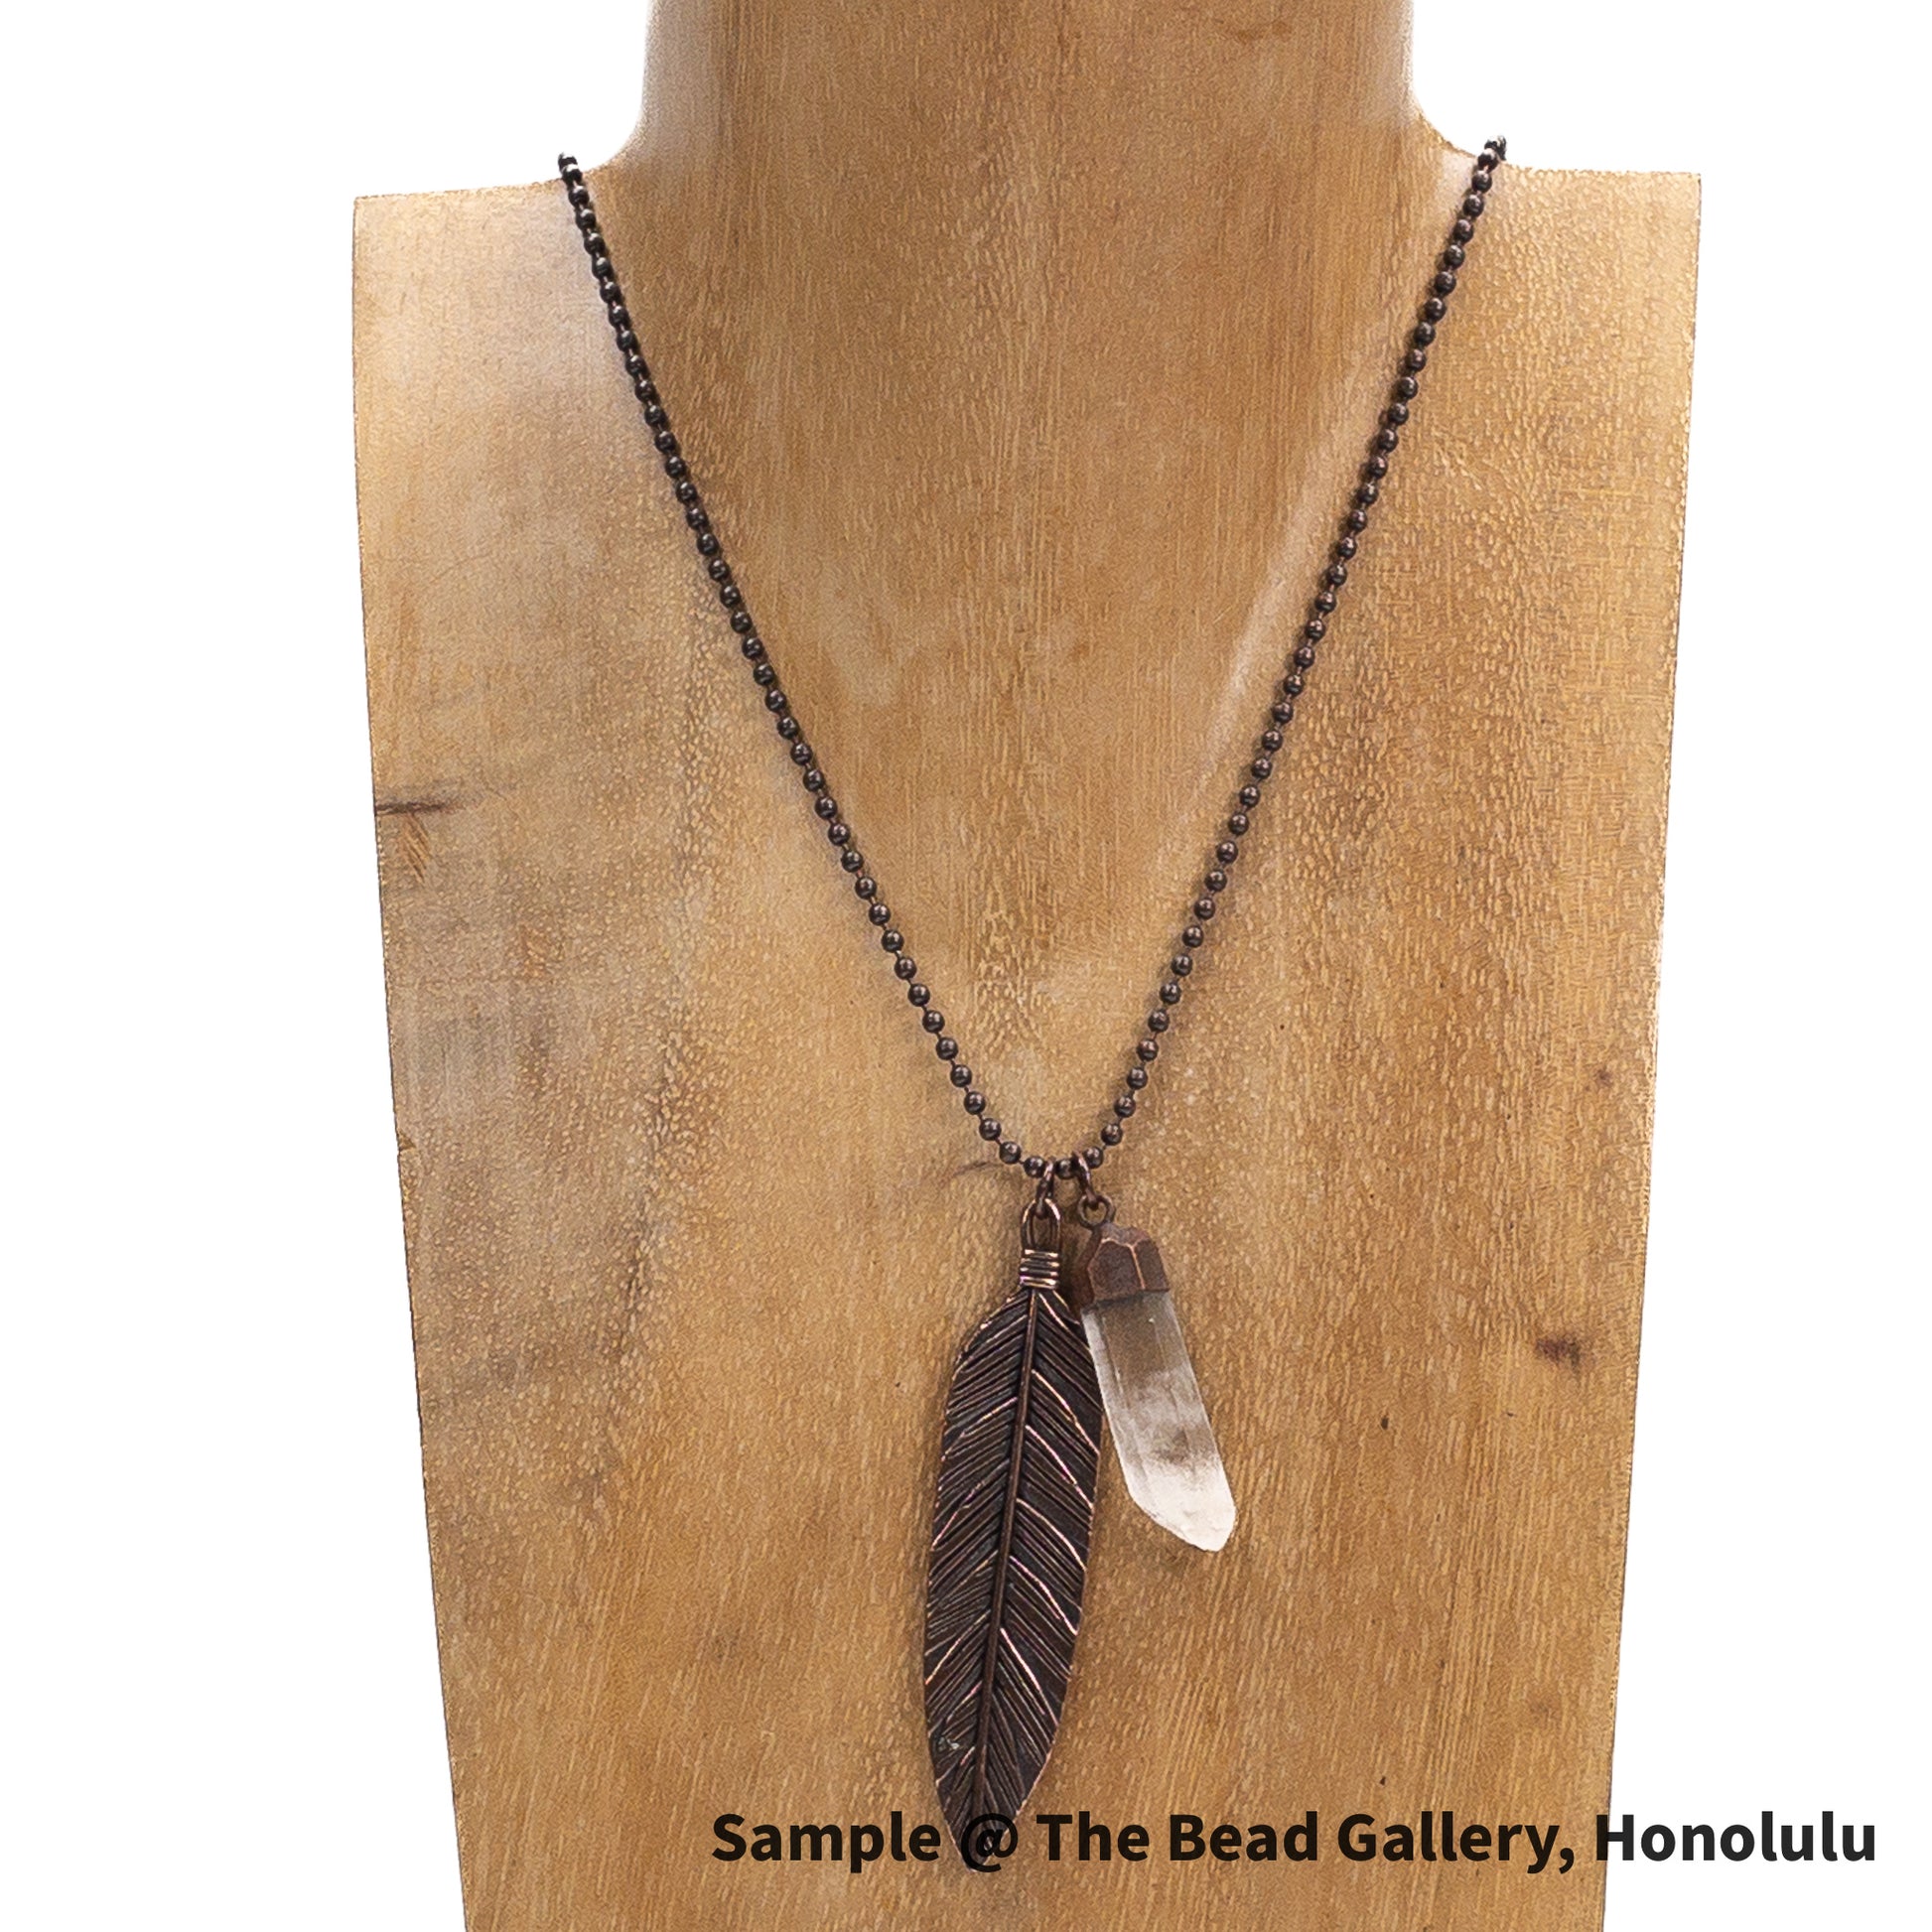 Jumbo Feather Pendant (4 Colors Available) - 1 pc.